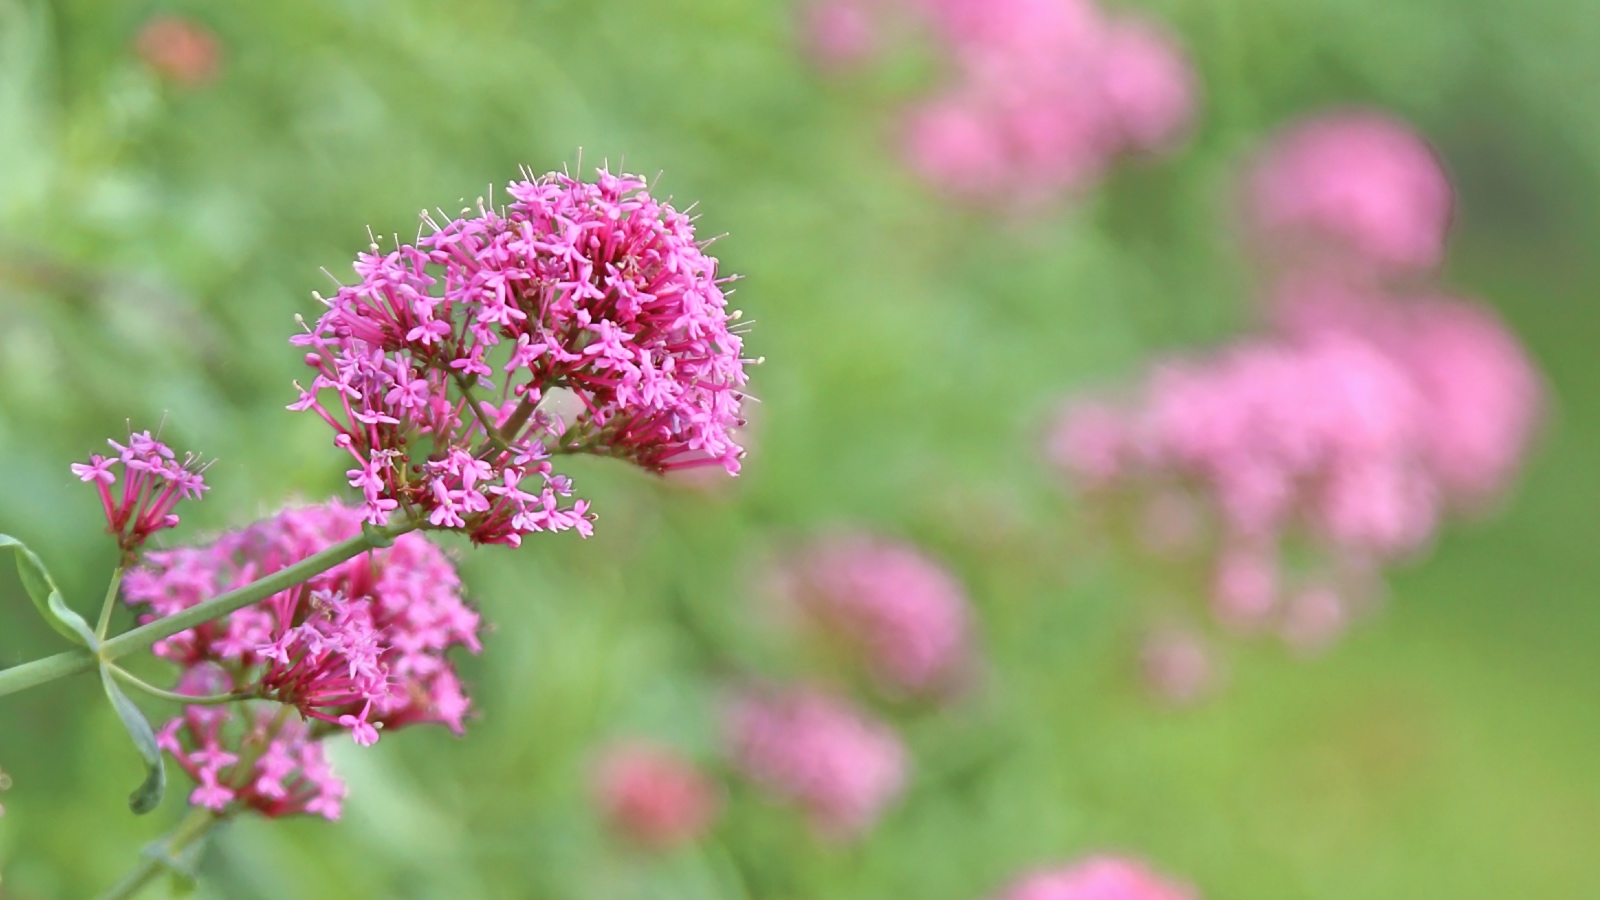 the plant Valerian often found in supplements for sleep